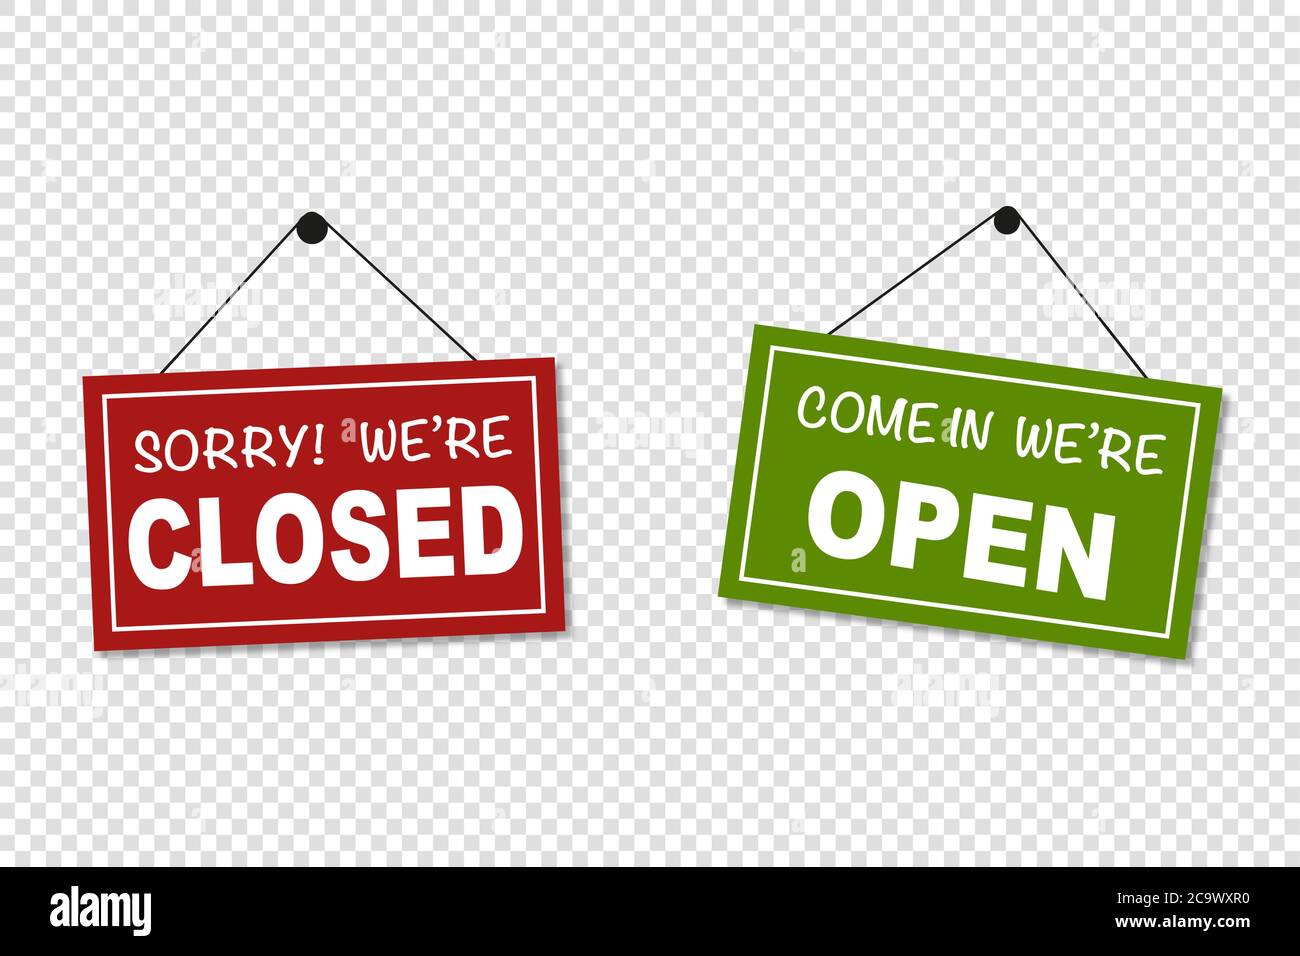 Come in we are open and sorry we are closed signs vector isolated. Green and red board for the shop. Information sign. Stock Vector